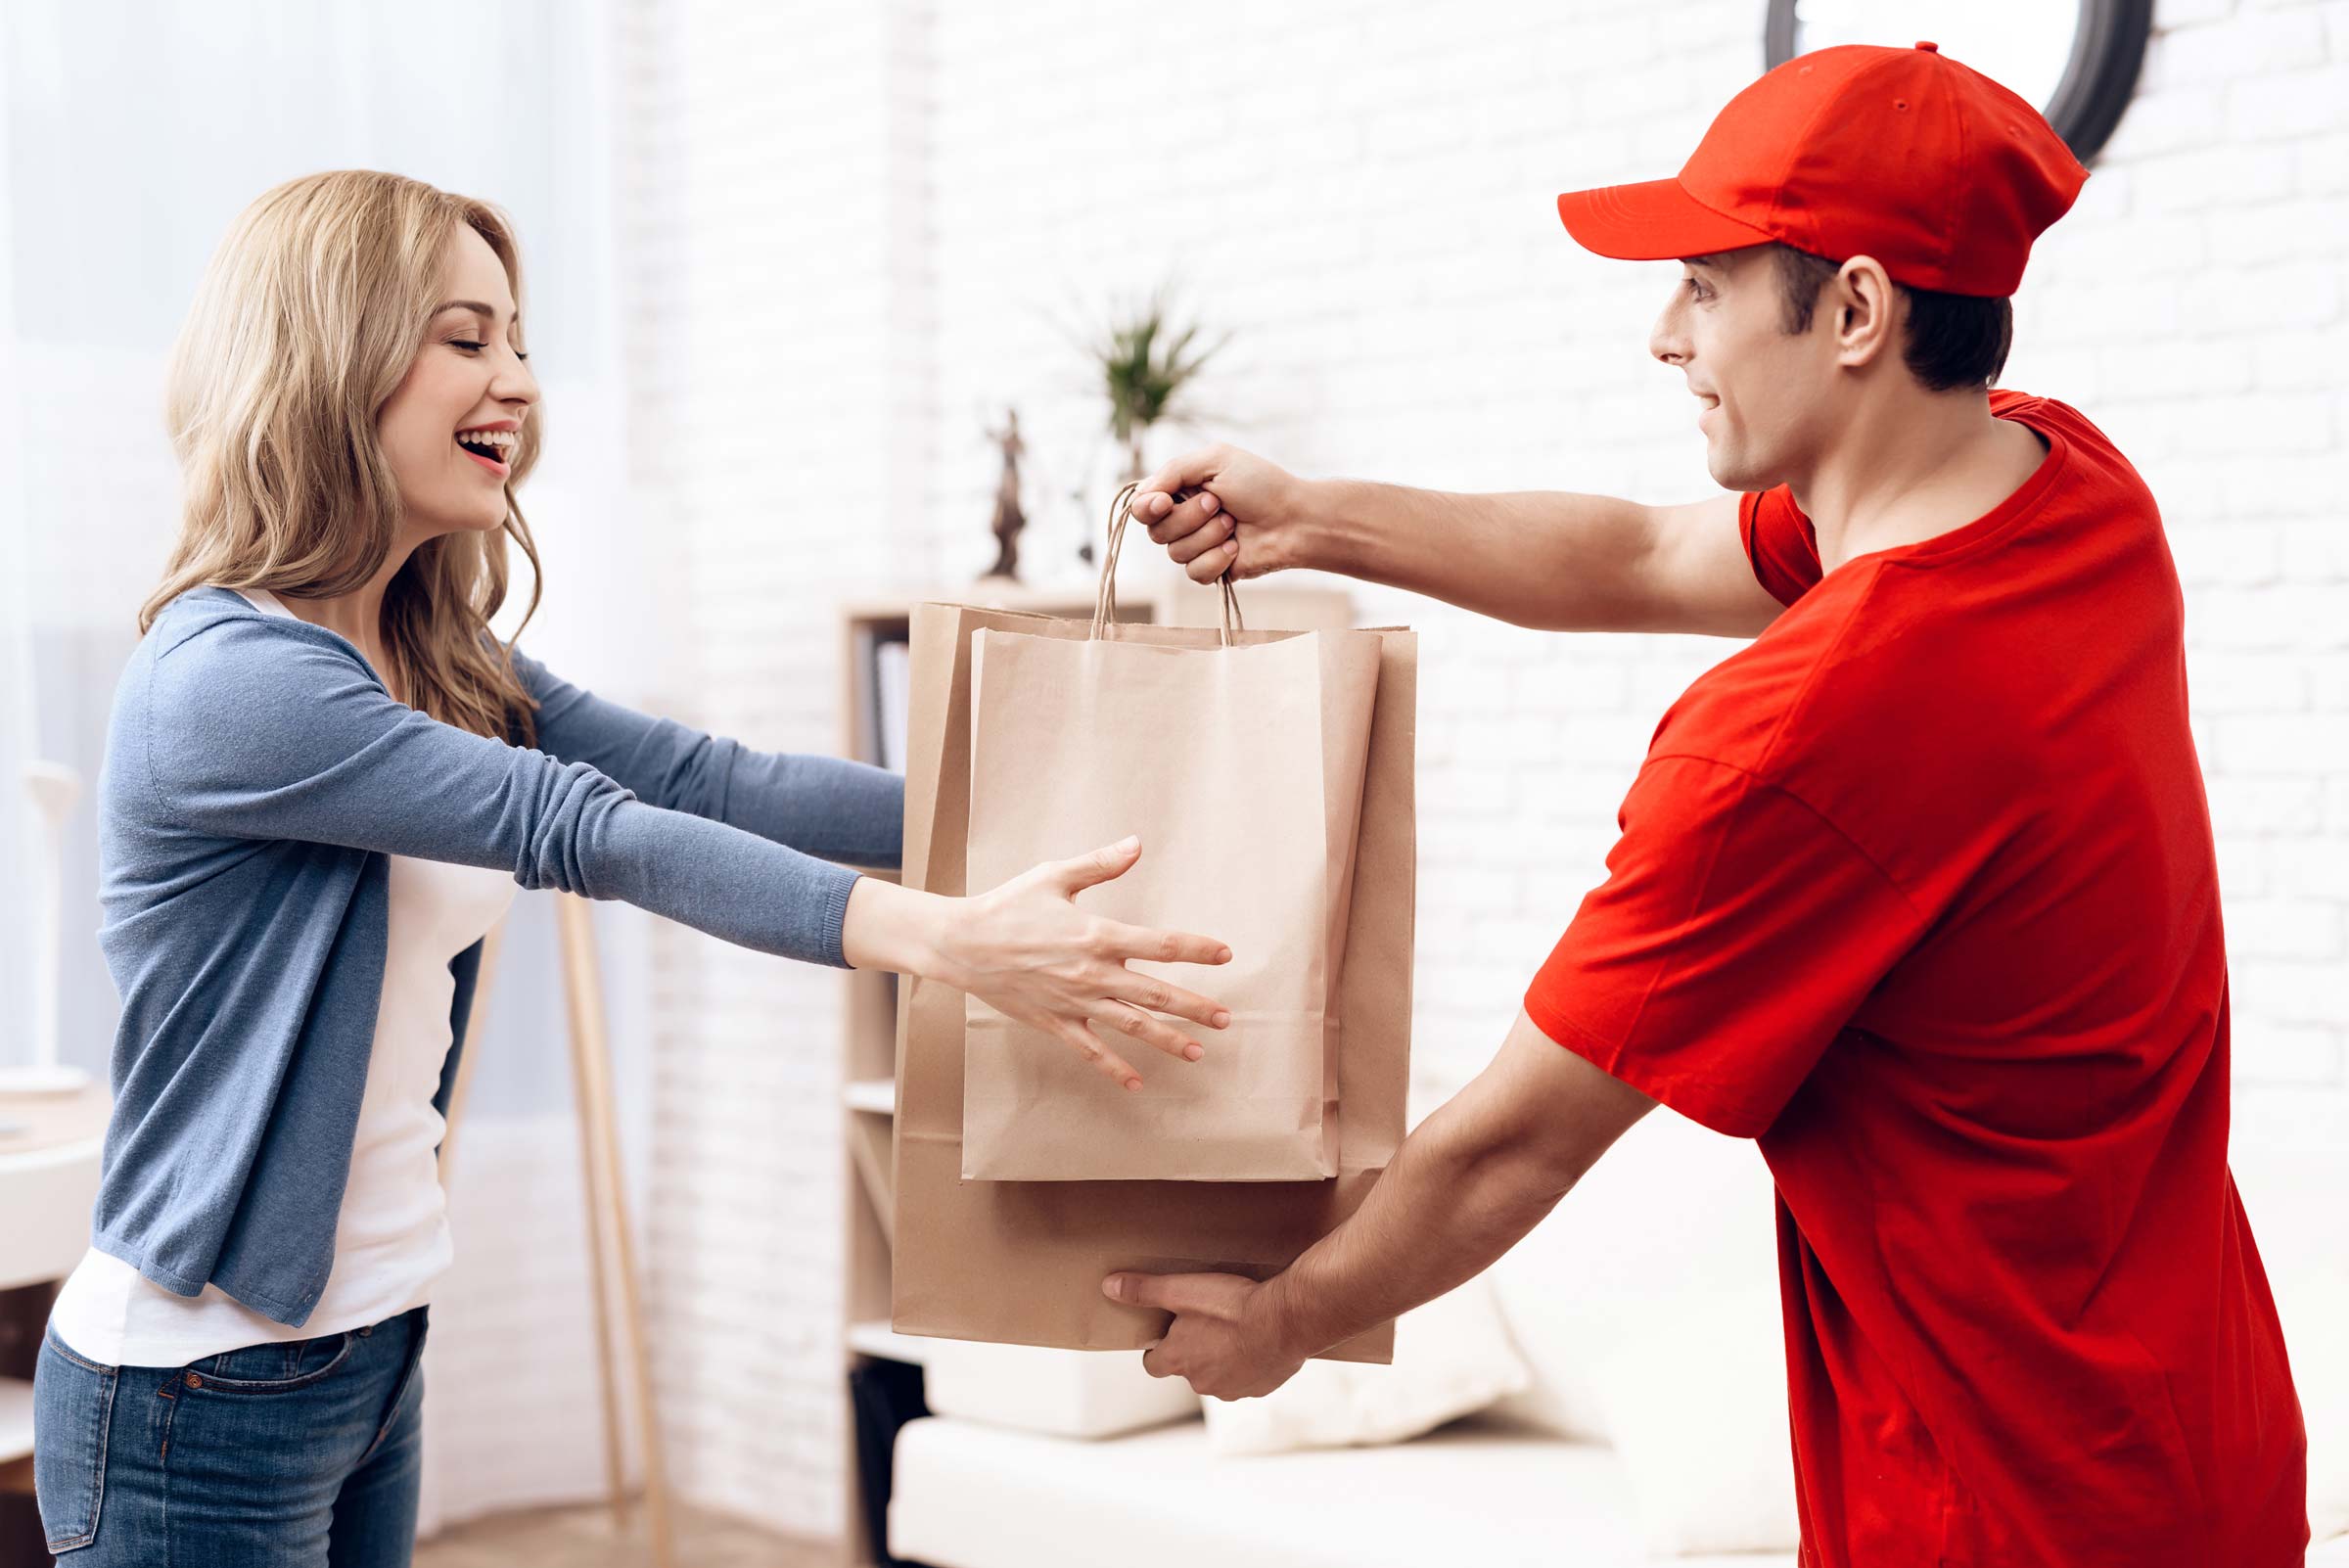 Financial Considerations When Using Third-Party Delivery Services